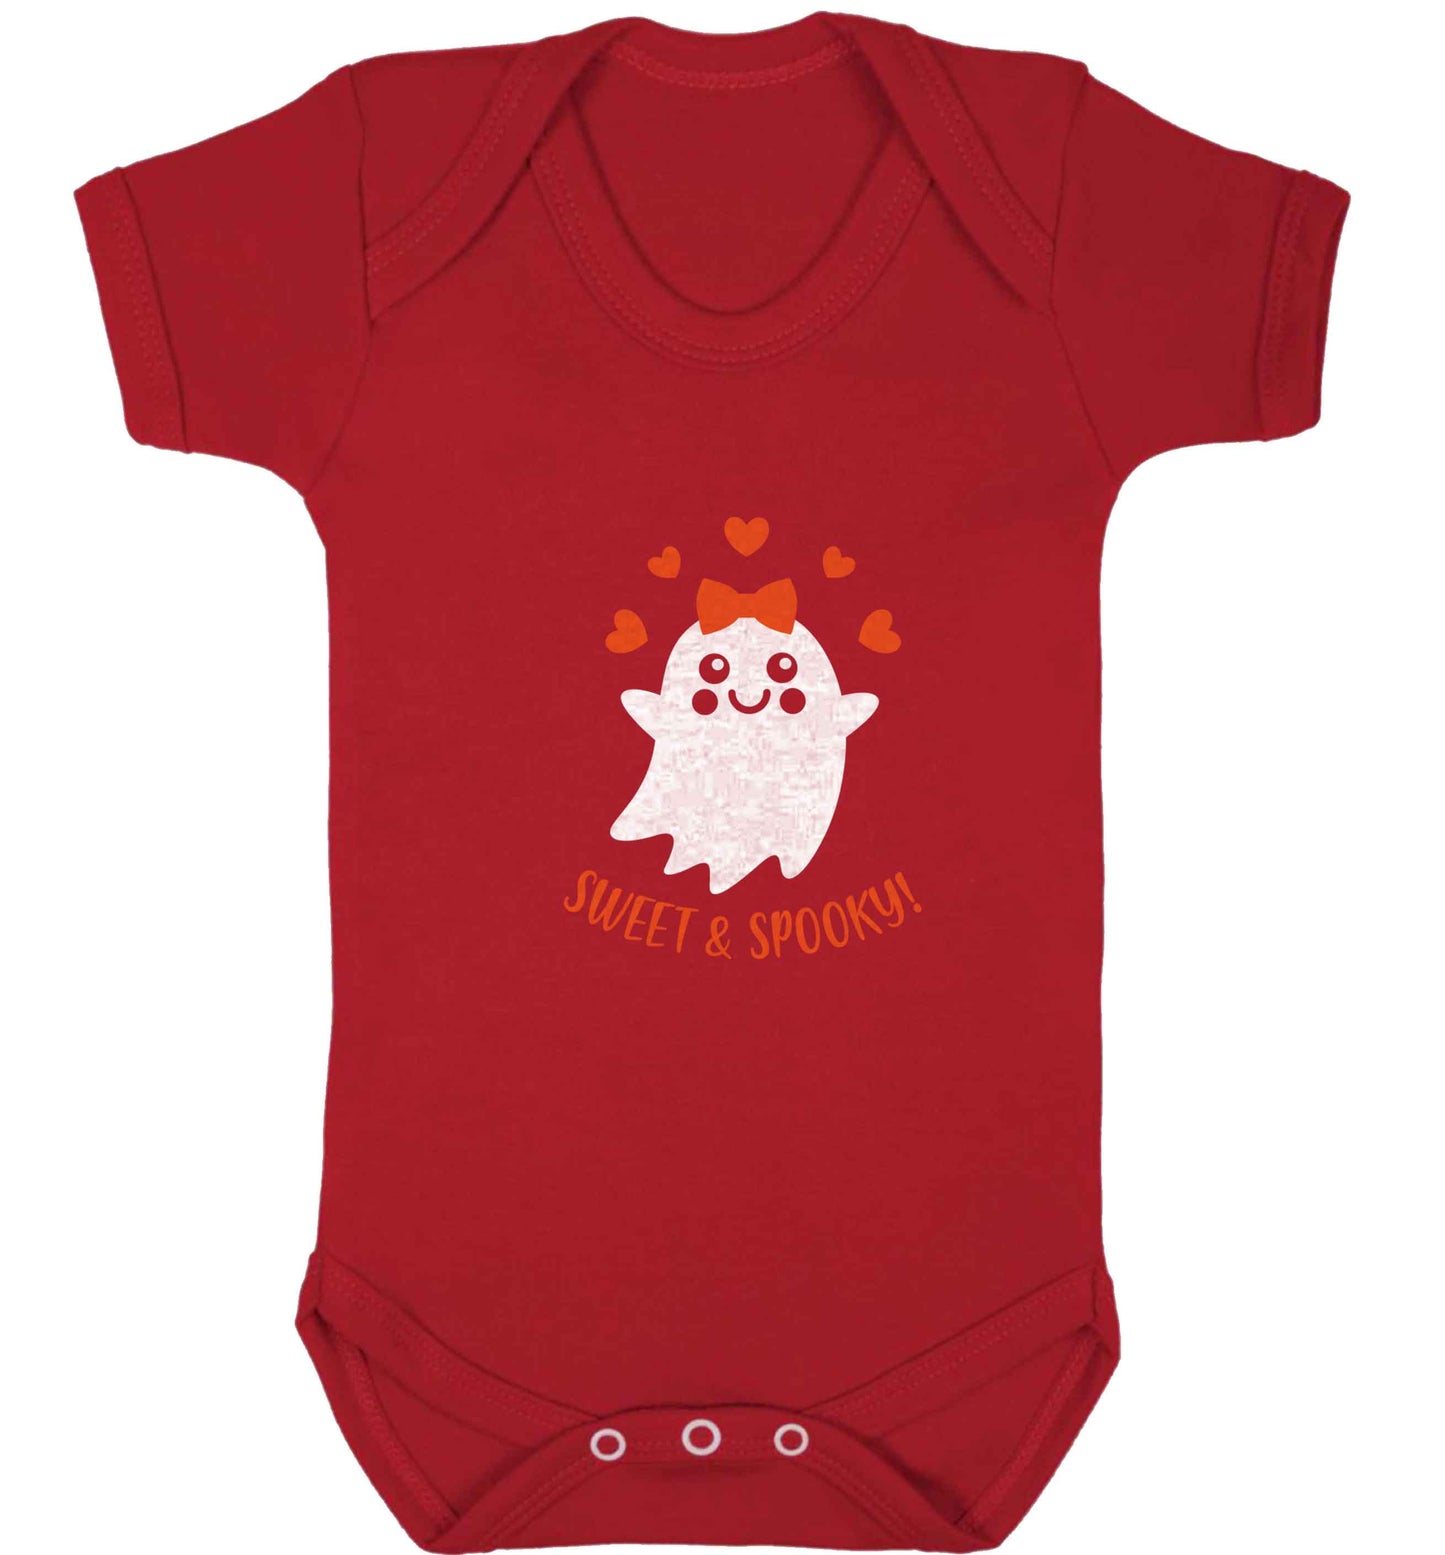 Sweet and spooky baby vest red 18-24 months